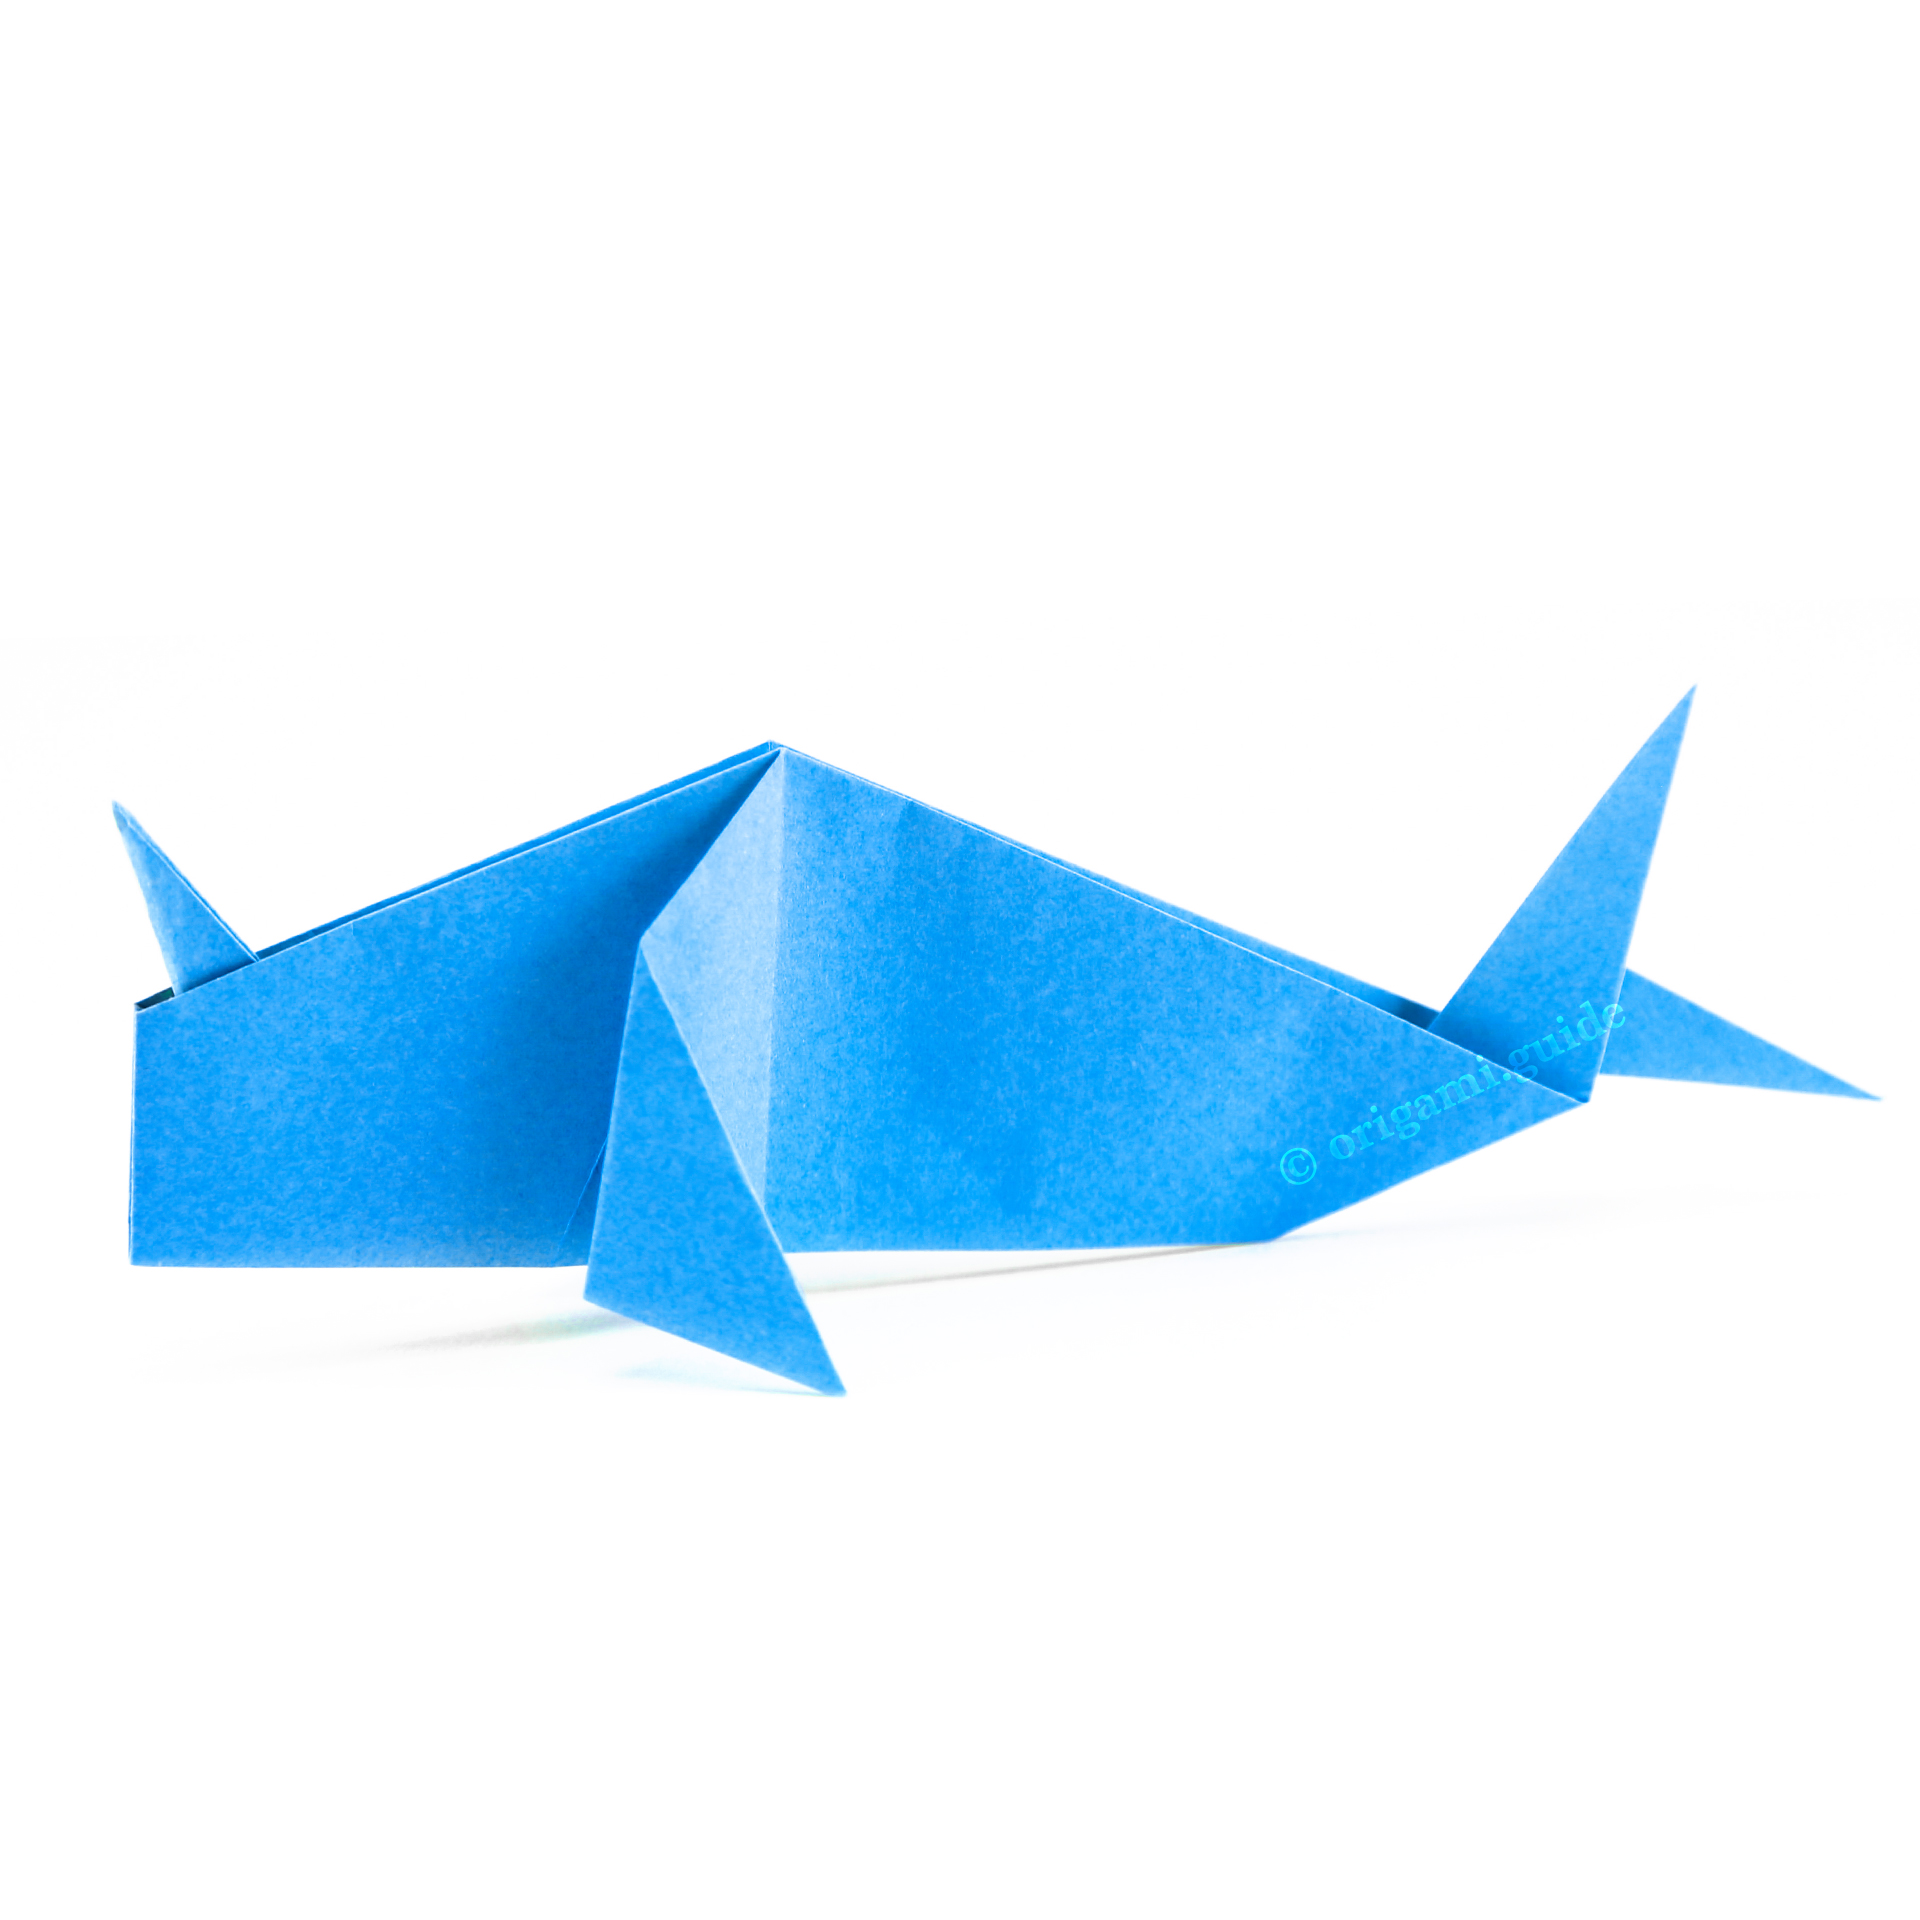 How To Make Origami Animals - Origami Guide